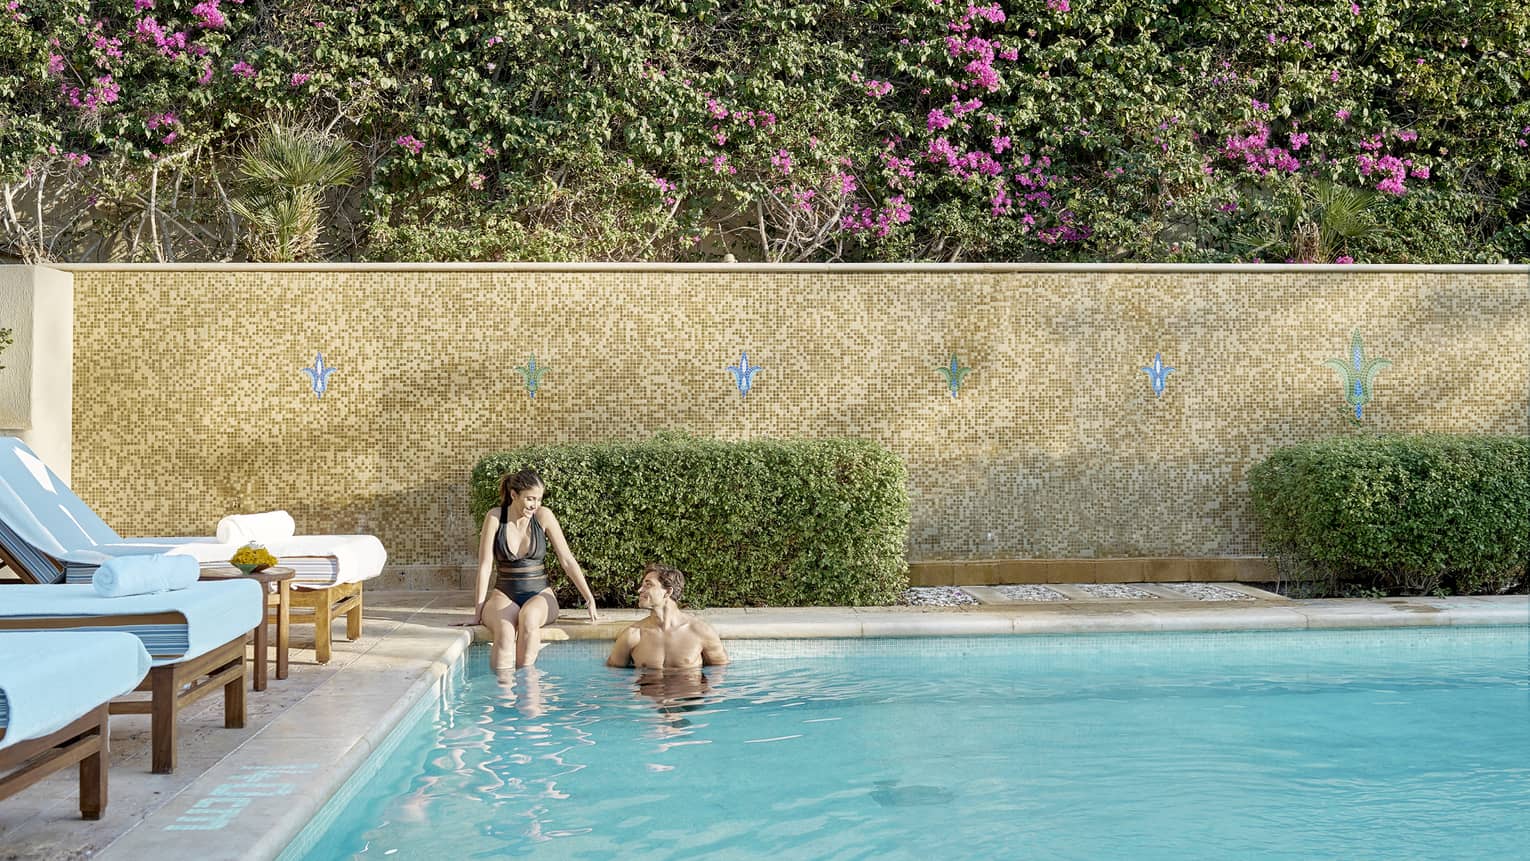 Couple relaxes poolside, row of lounge chairs and pink flowering hedges visible behind wall